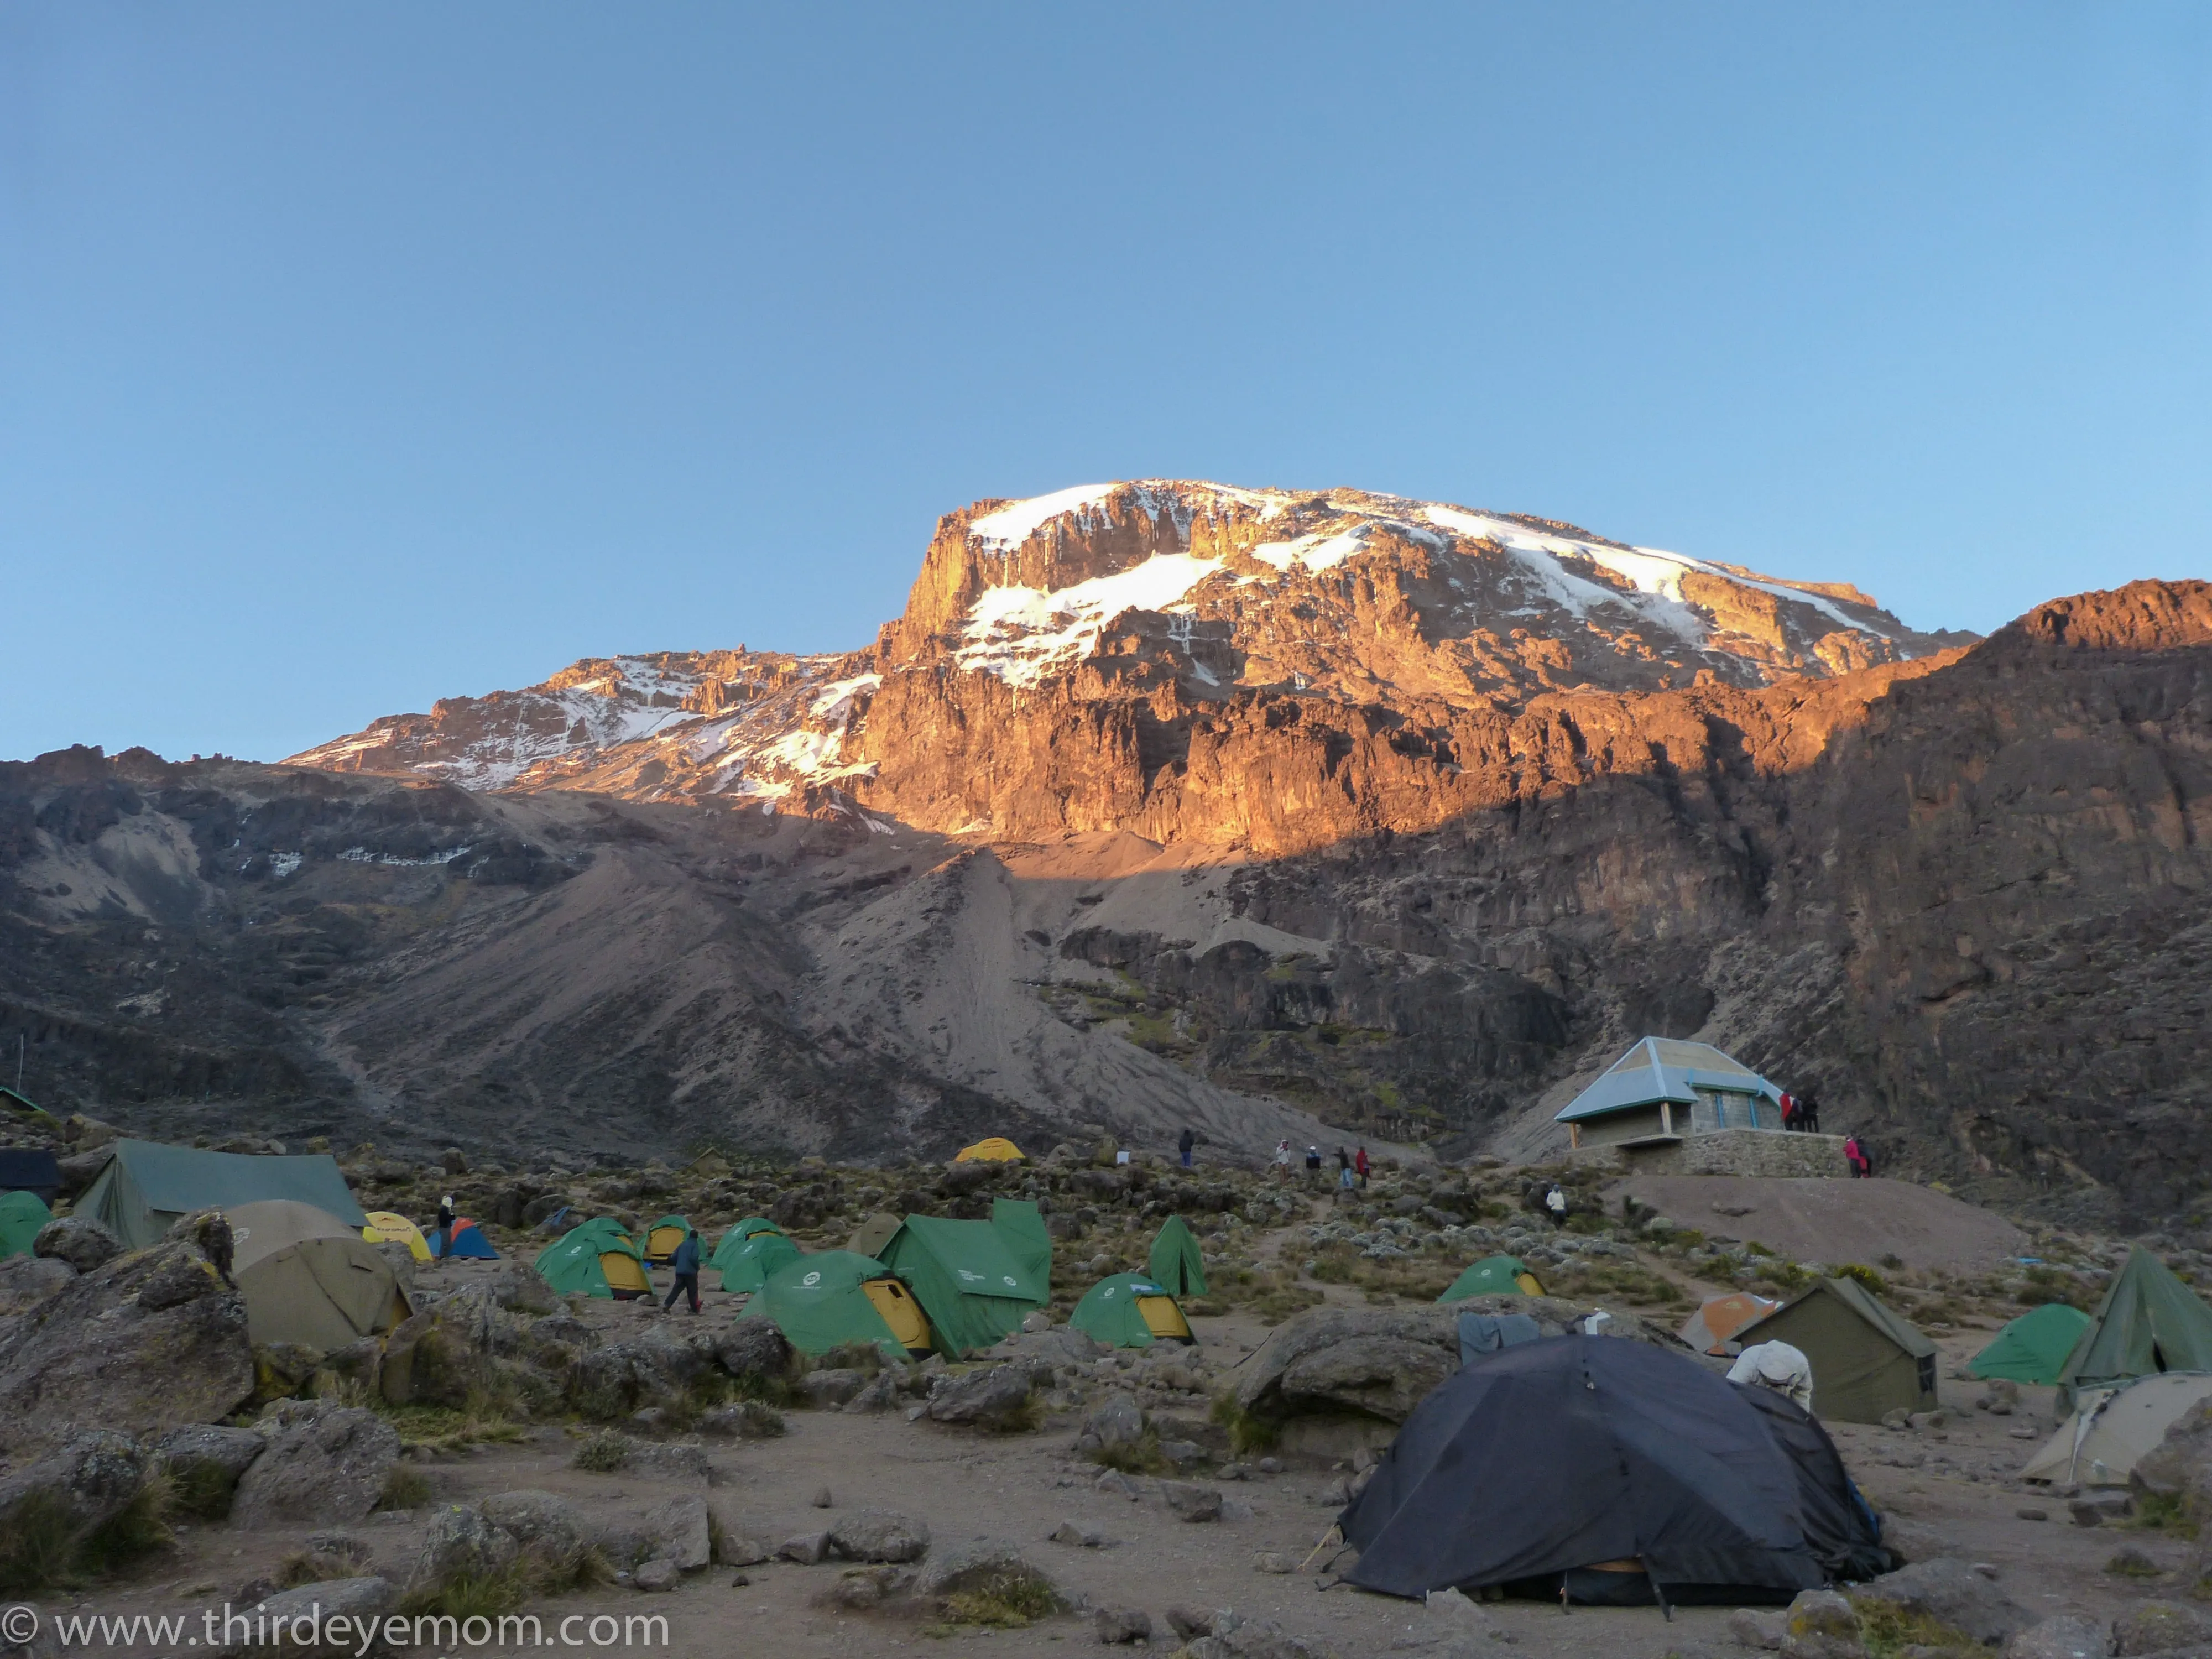 4 TREKKING FROM SHIRA 2 CAMP TO THE LAVA TOWER AND DESCENT TO BARRANCO